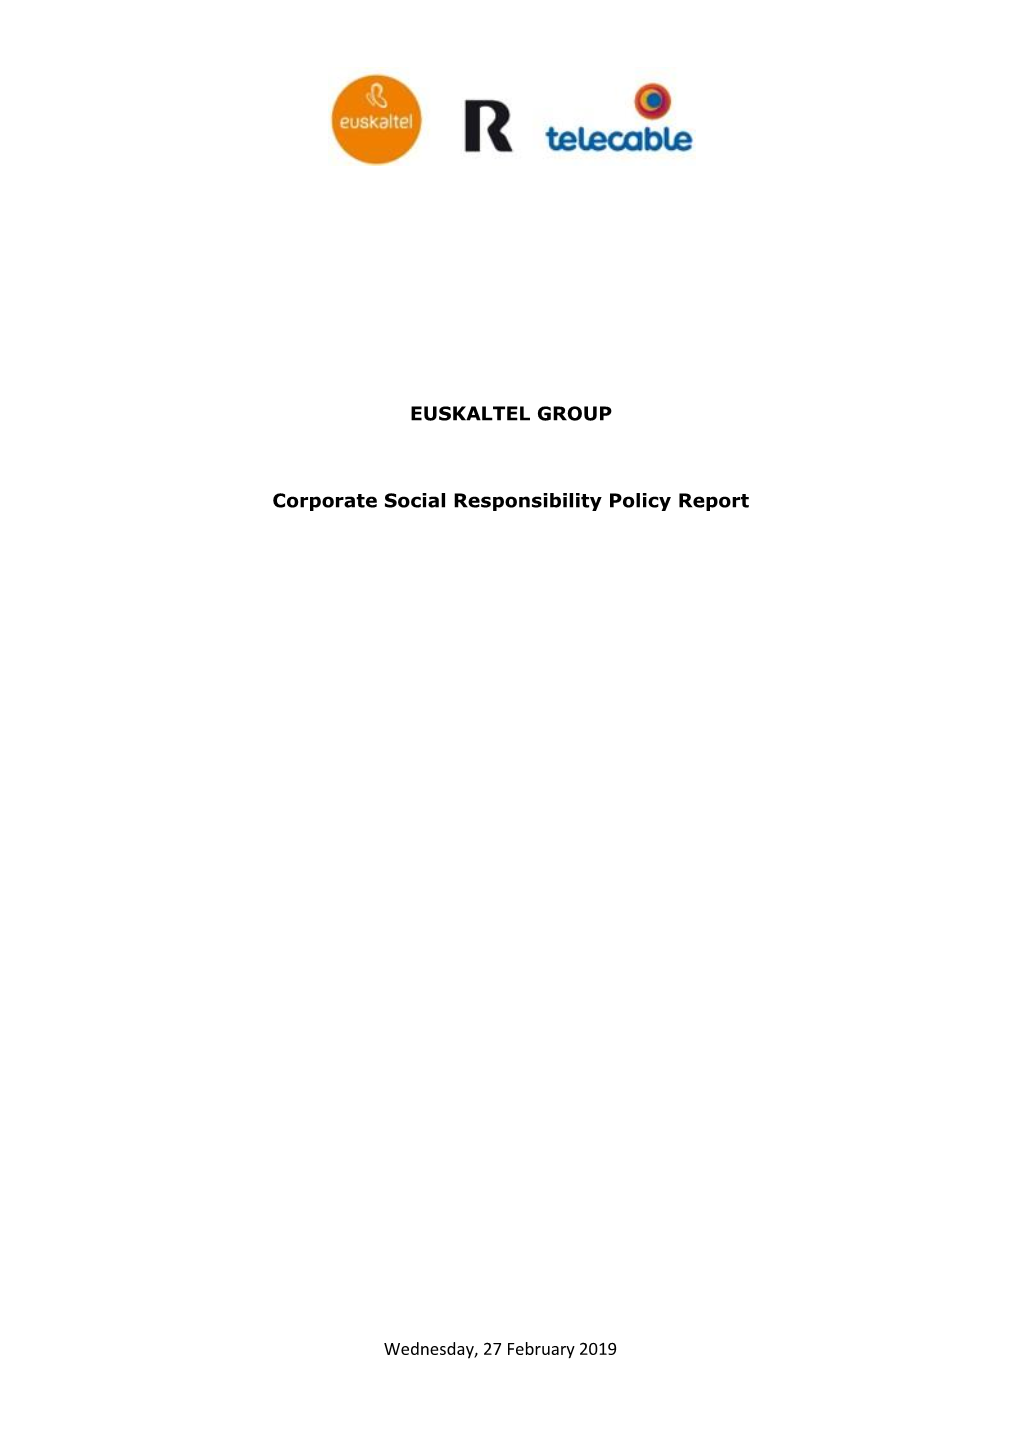 Corporate Social Responsibility Policy Report